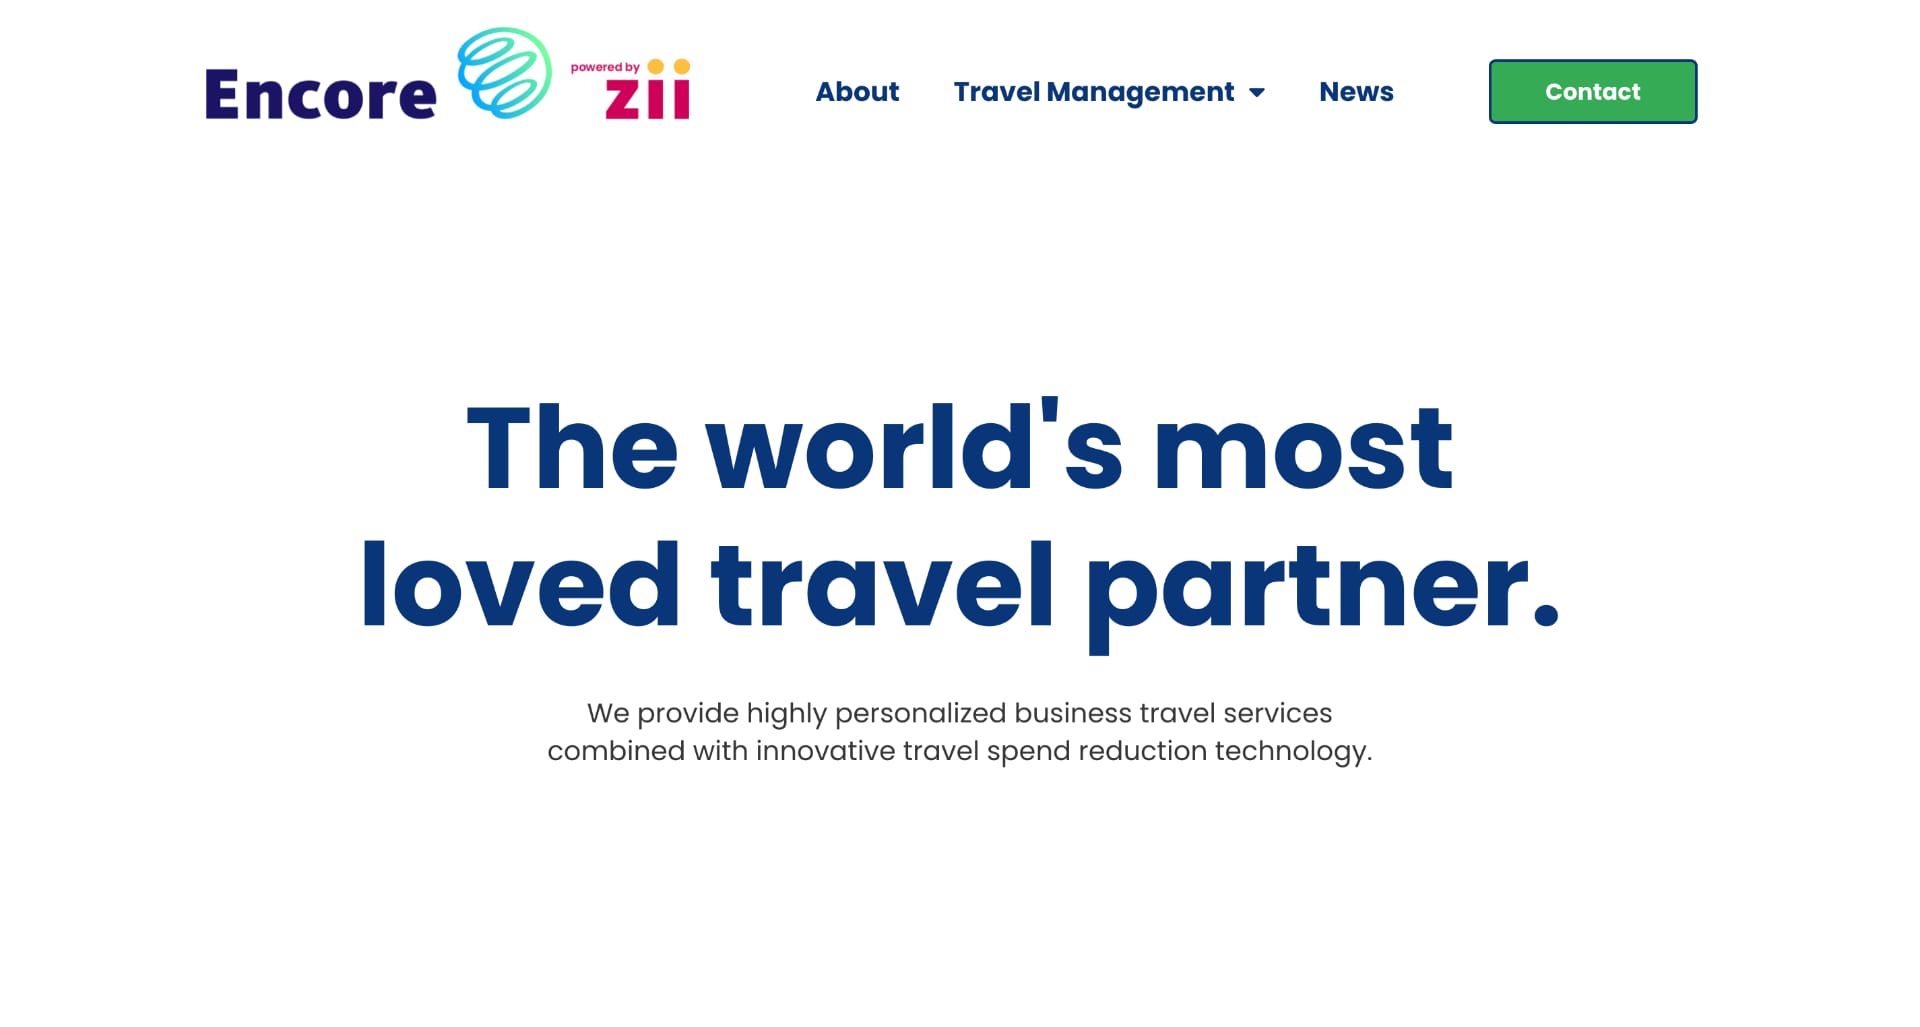 A screenshot of the Encore Corporate Travel website.